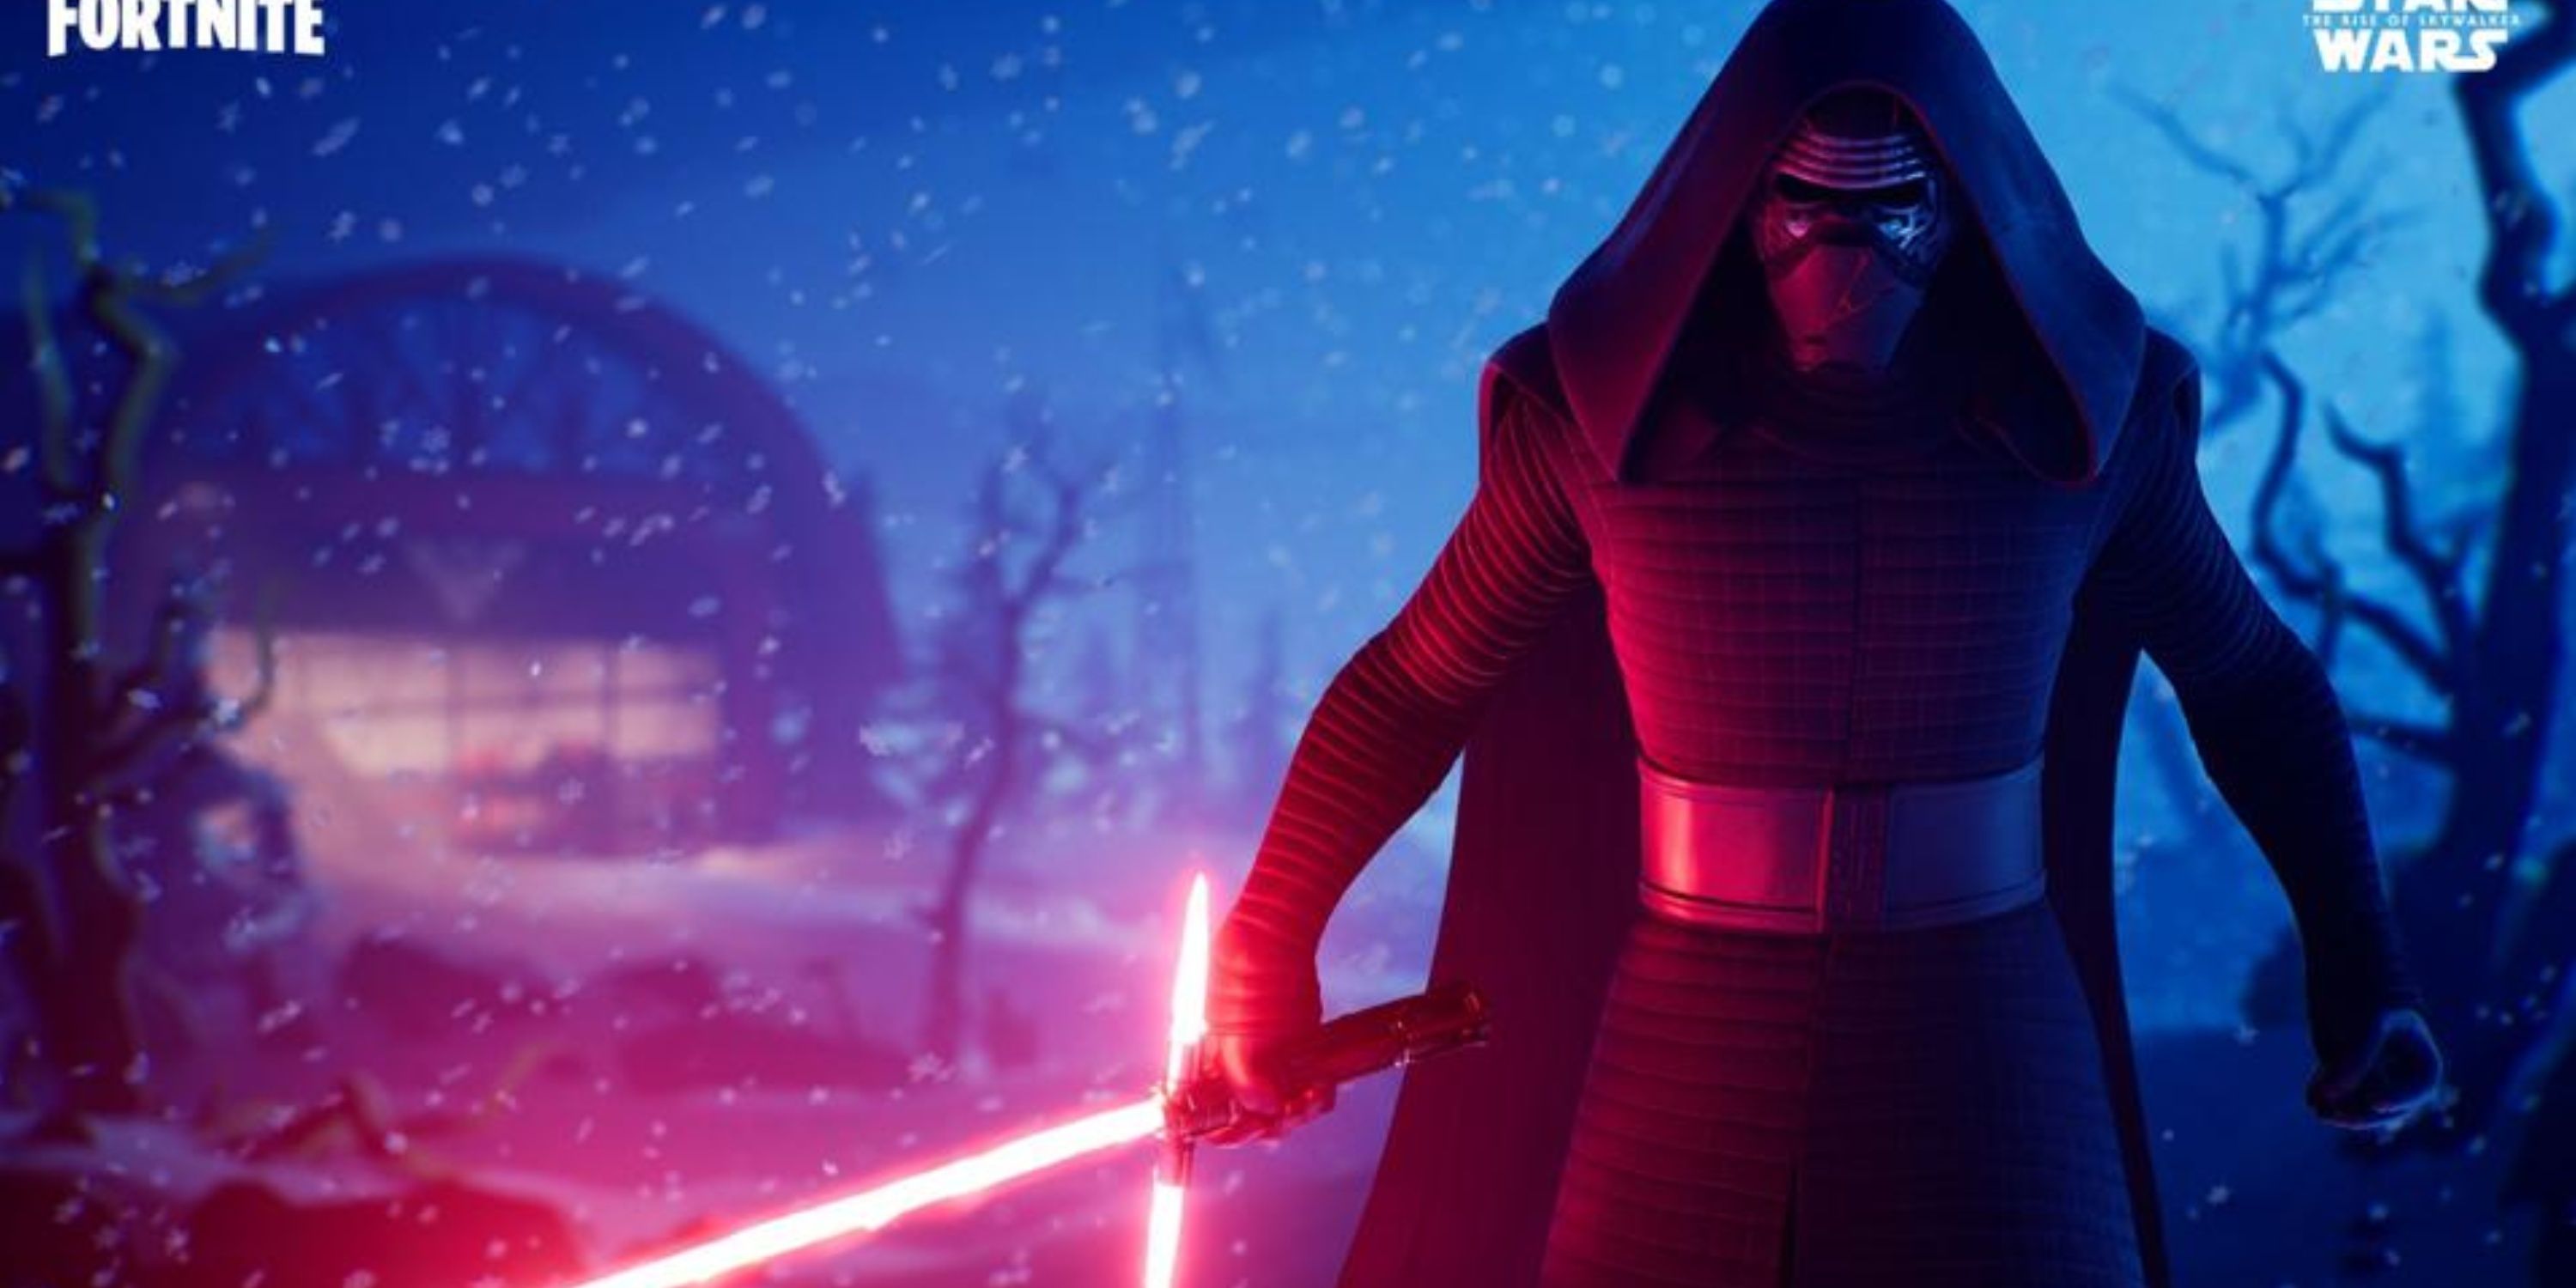 kylo ren with his lightsaber in Fortnite 